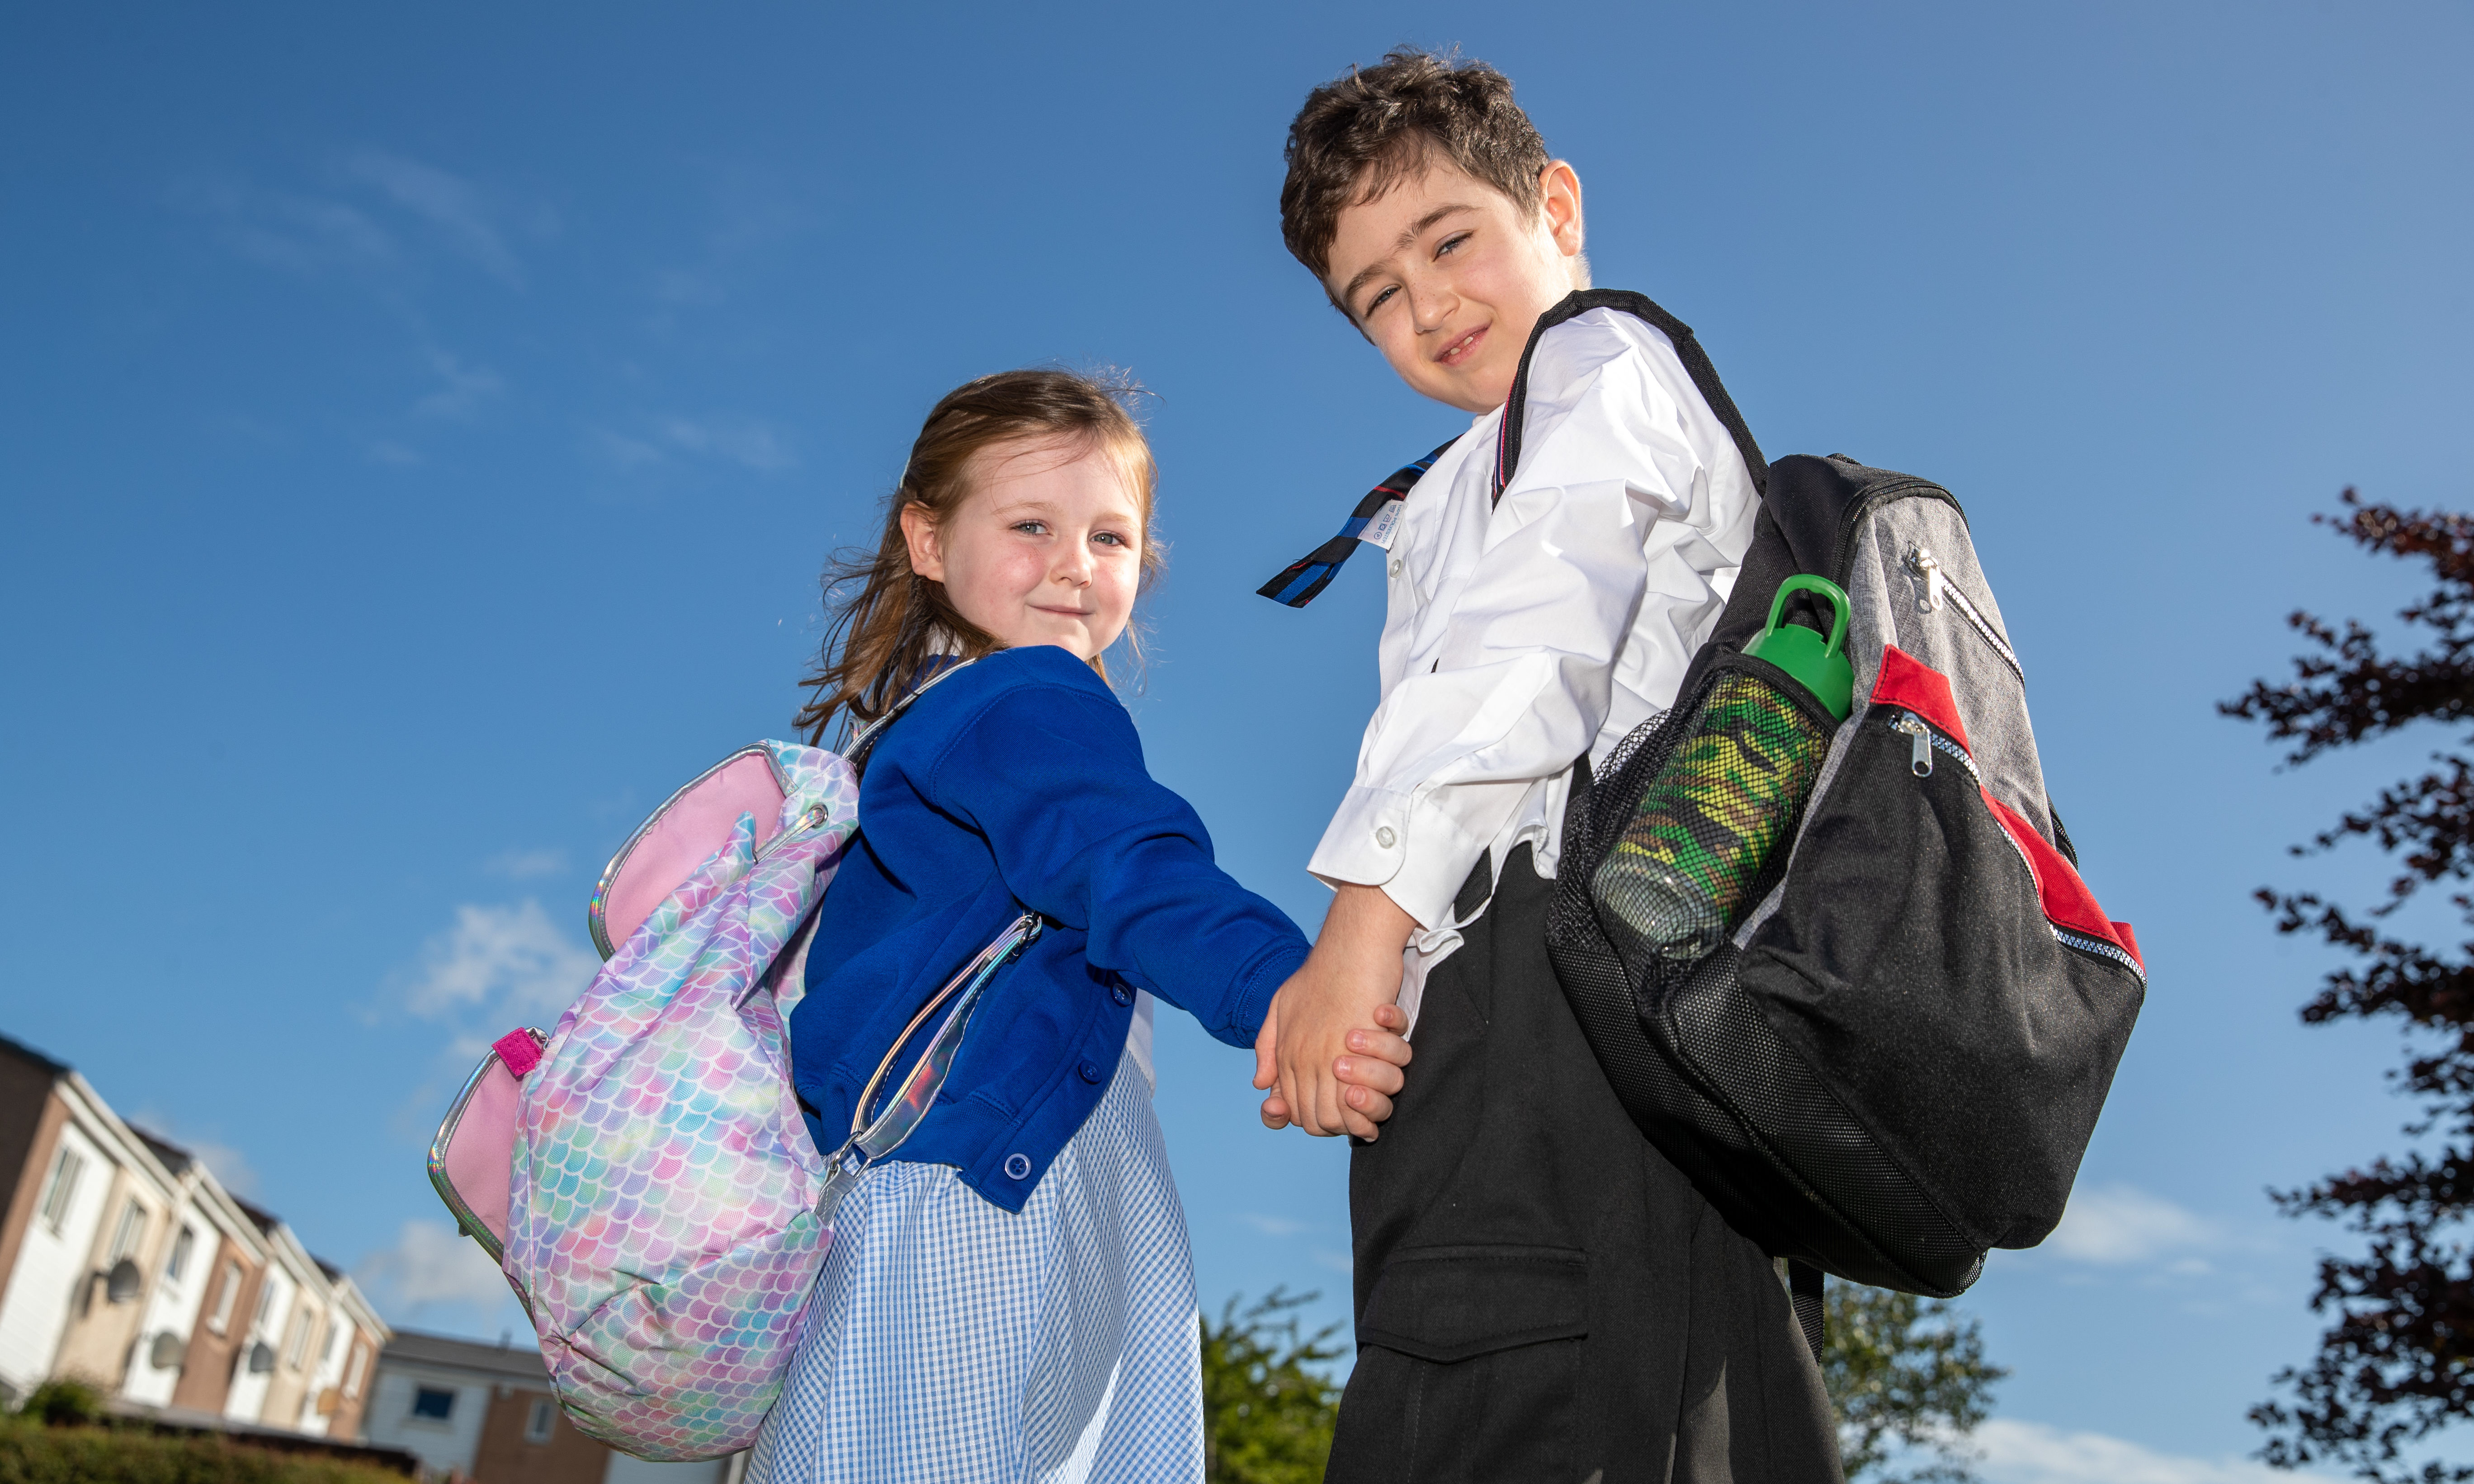 Michael and Charlotte are ready to start school.